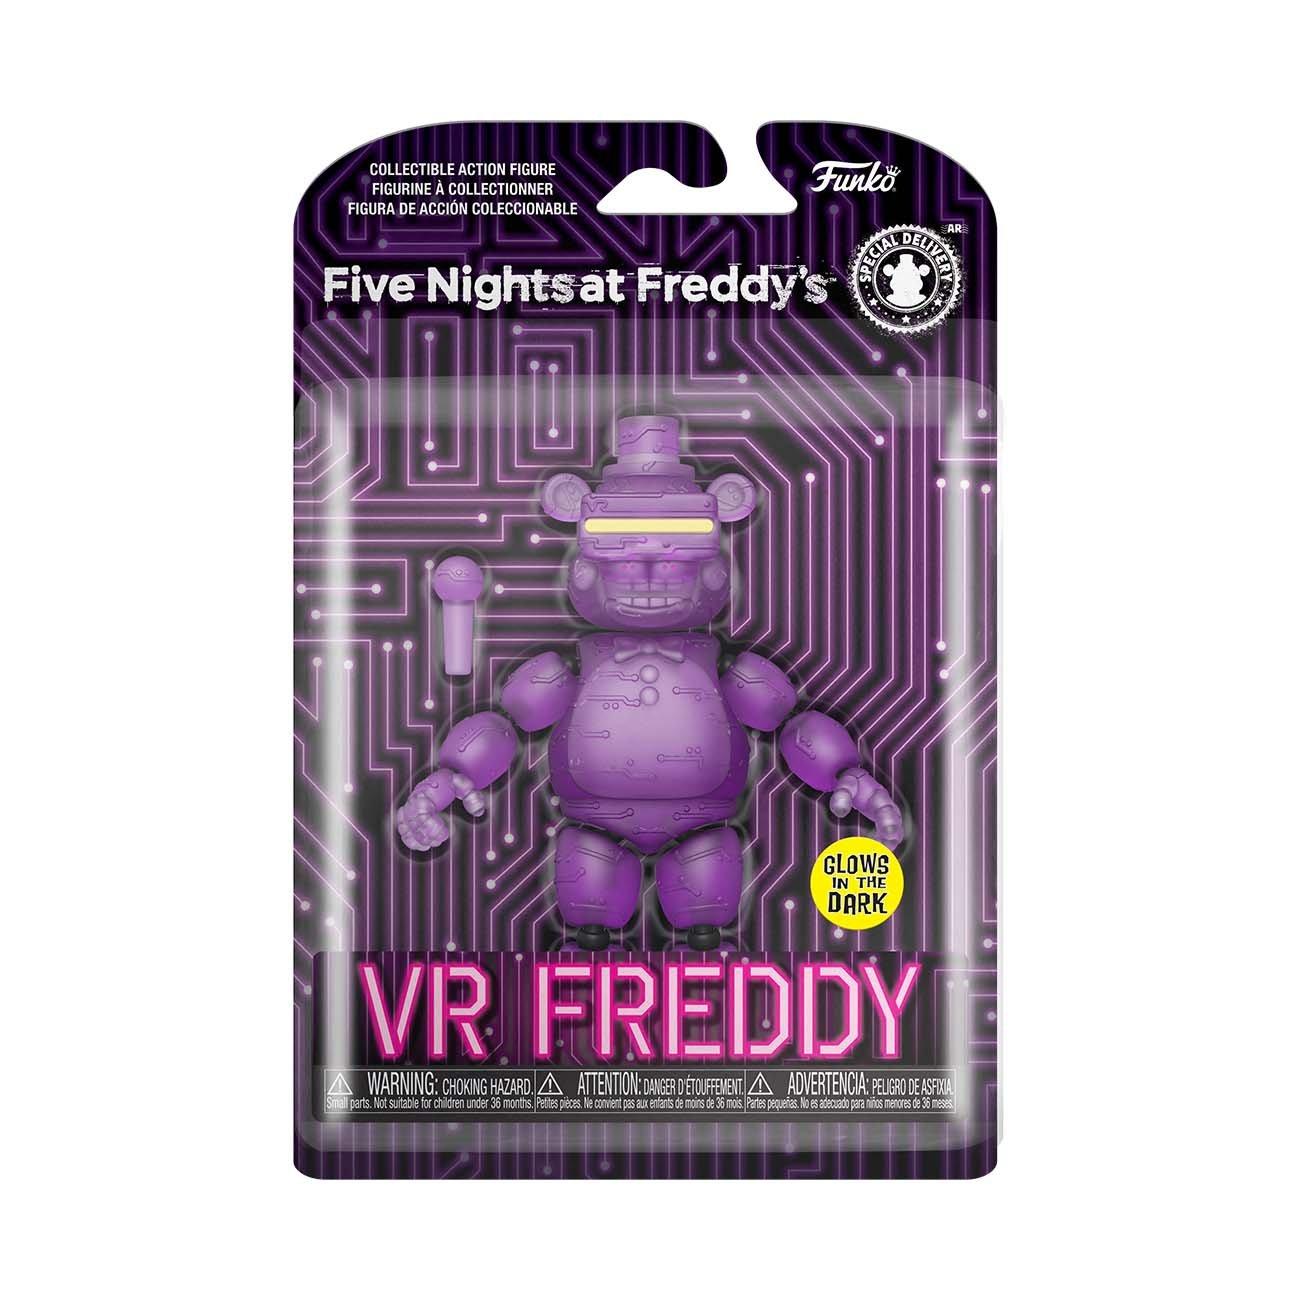 FNAF PLUSH U PICK Five Night's at Freddys FUNKO PLUSHIES Special Delivery  VR +